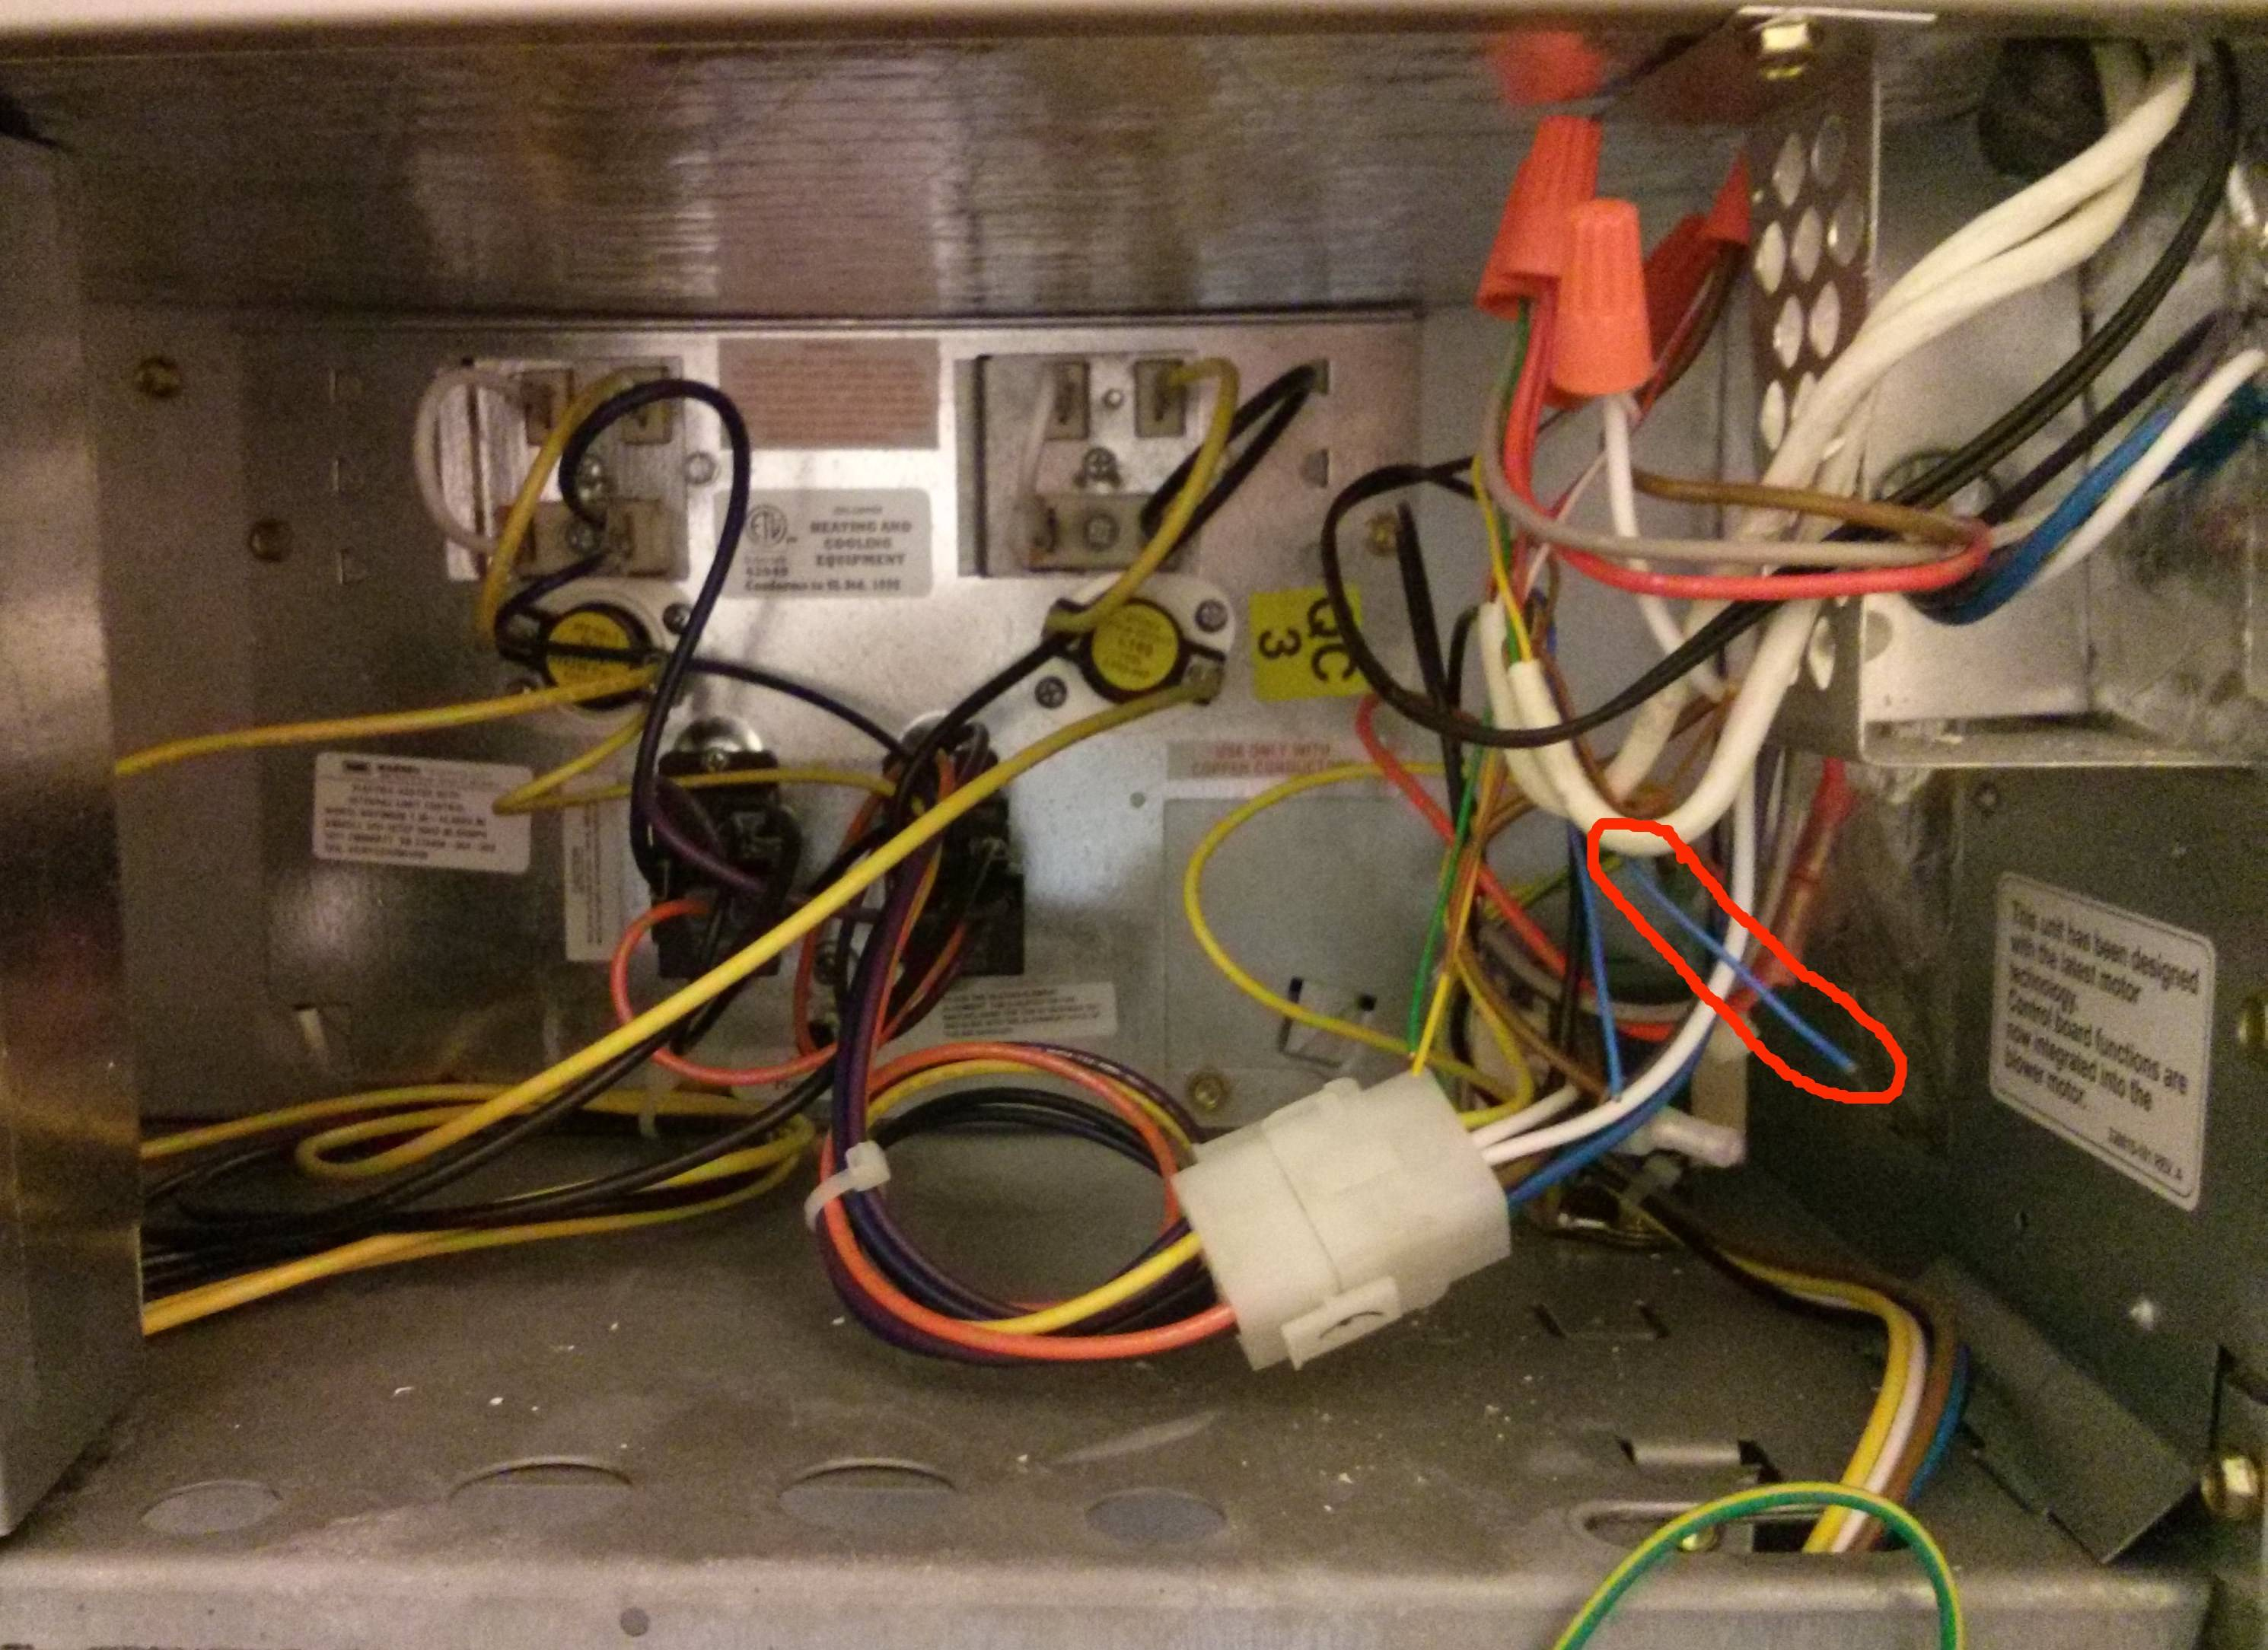 Wiring - How Do I Connect The Common Wire In A Carrier Air Handler - Carrier Air Conditioner Wiring Diagram